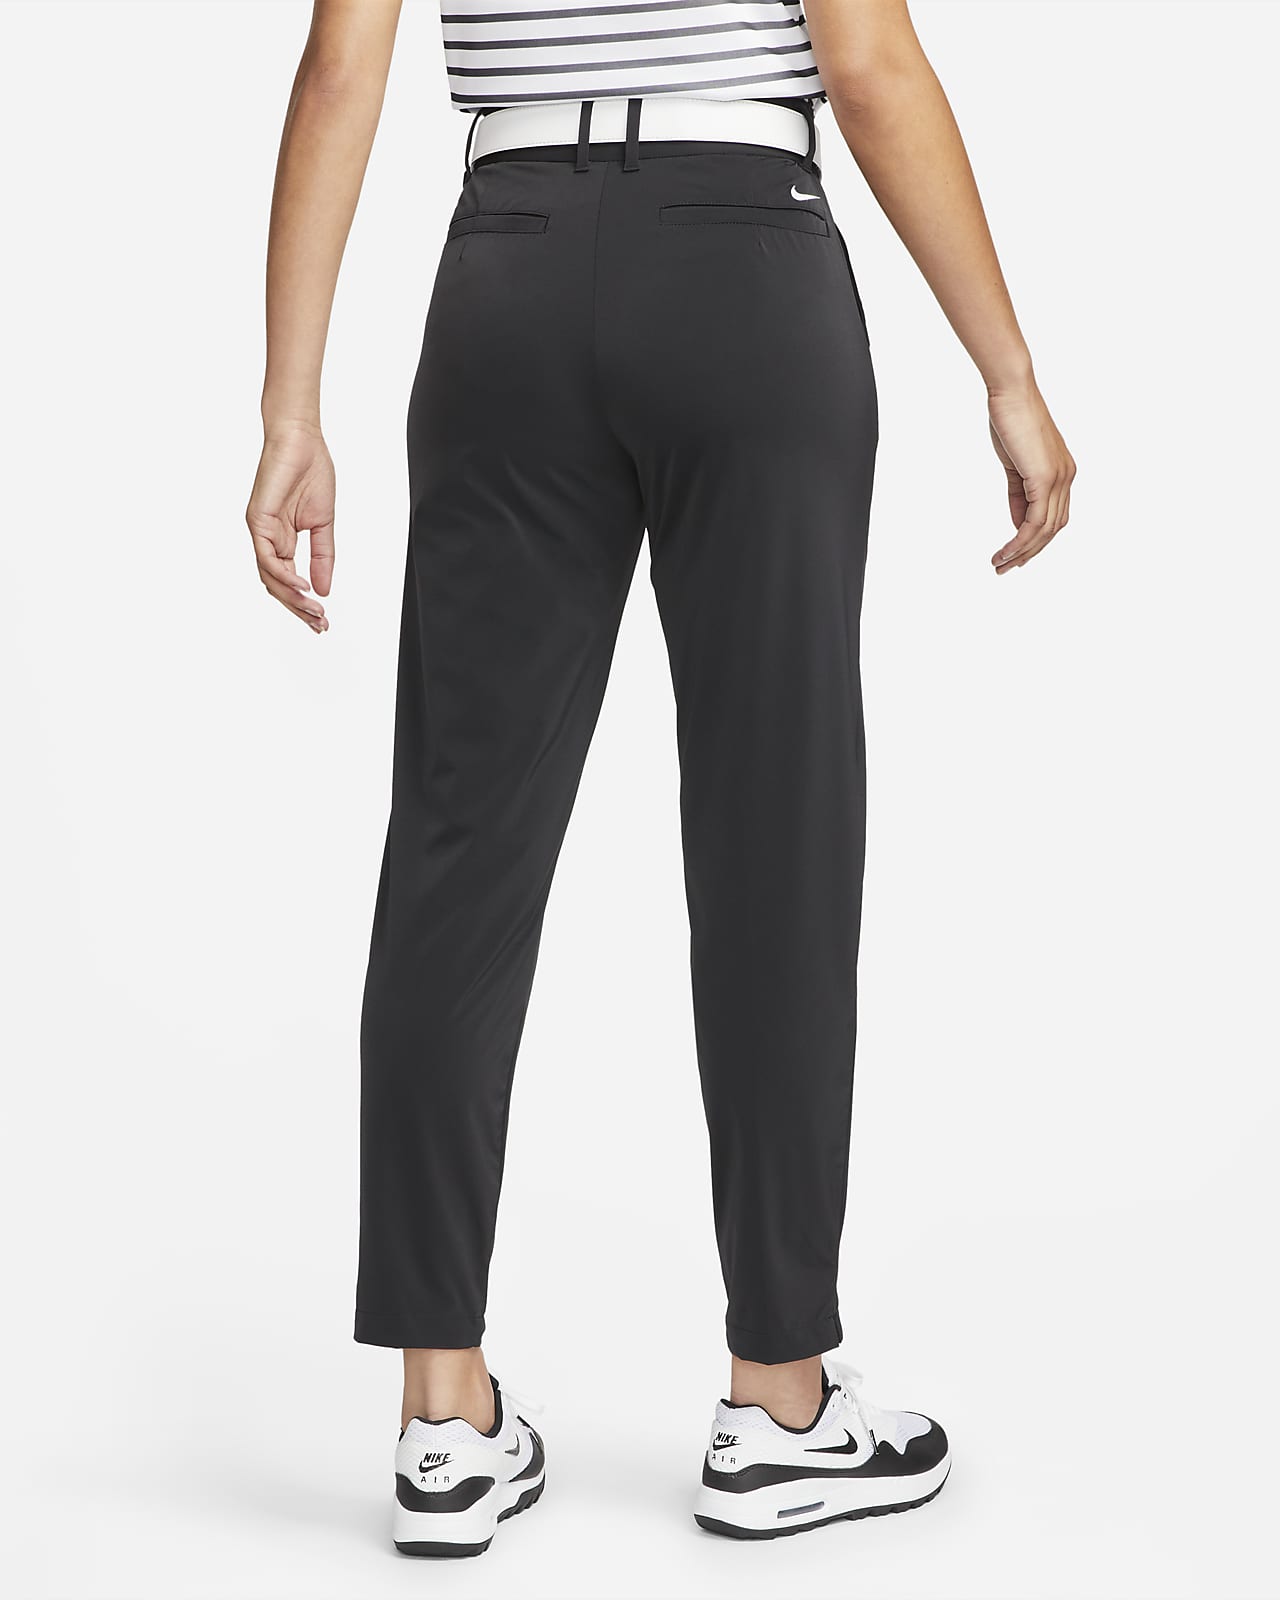 What are Nike's Best Golf Trousers?. Nike CA